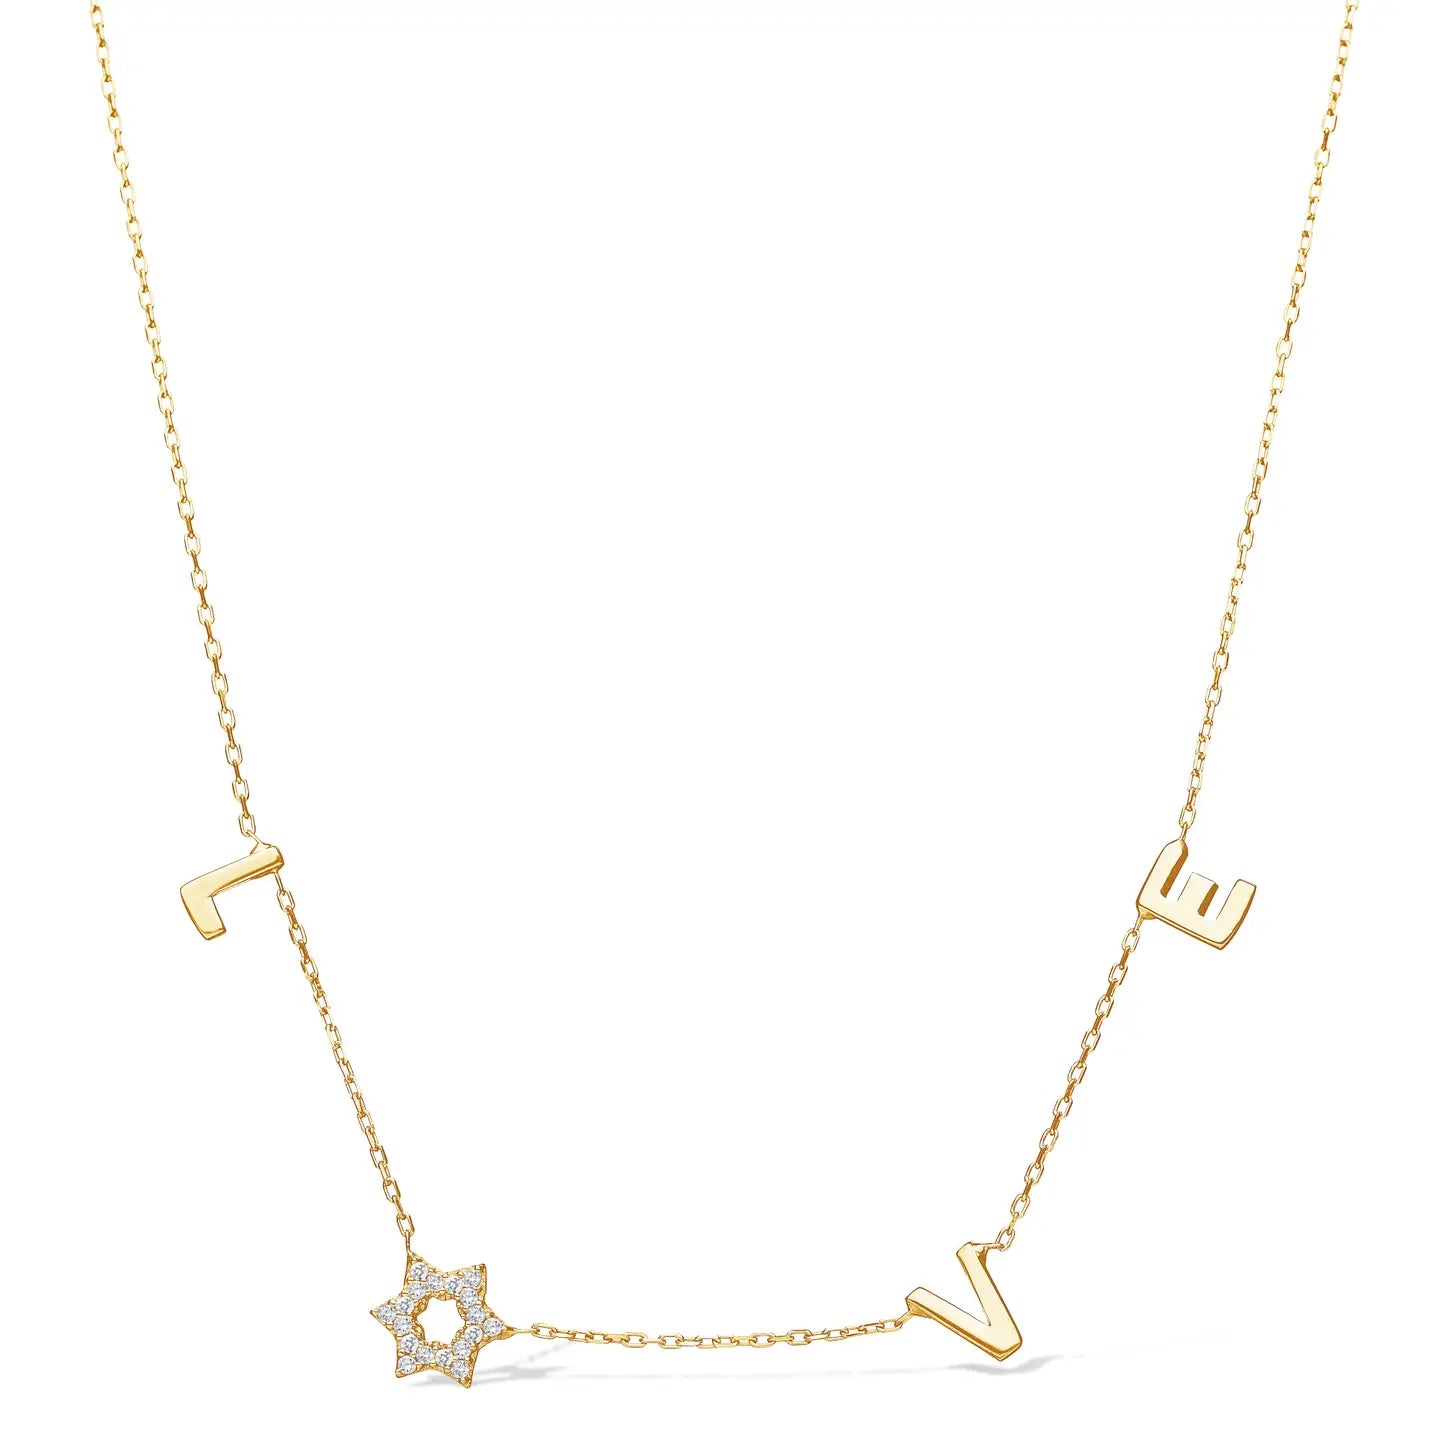 Jewish Star and Love Necklace with Sparkling Stones